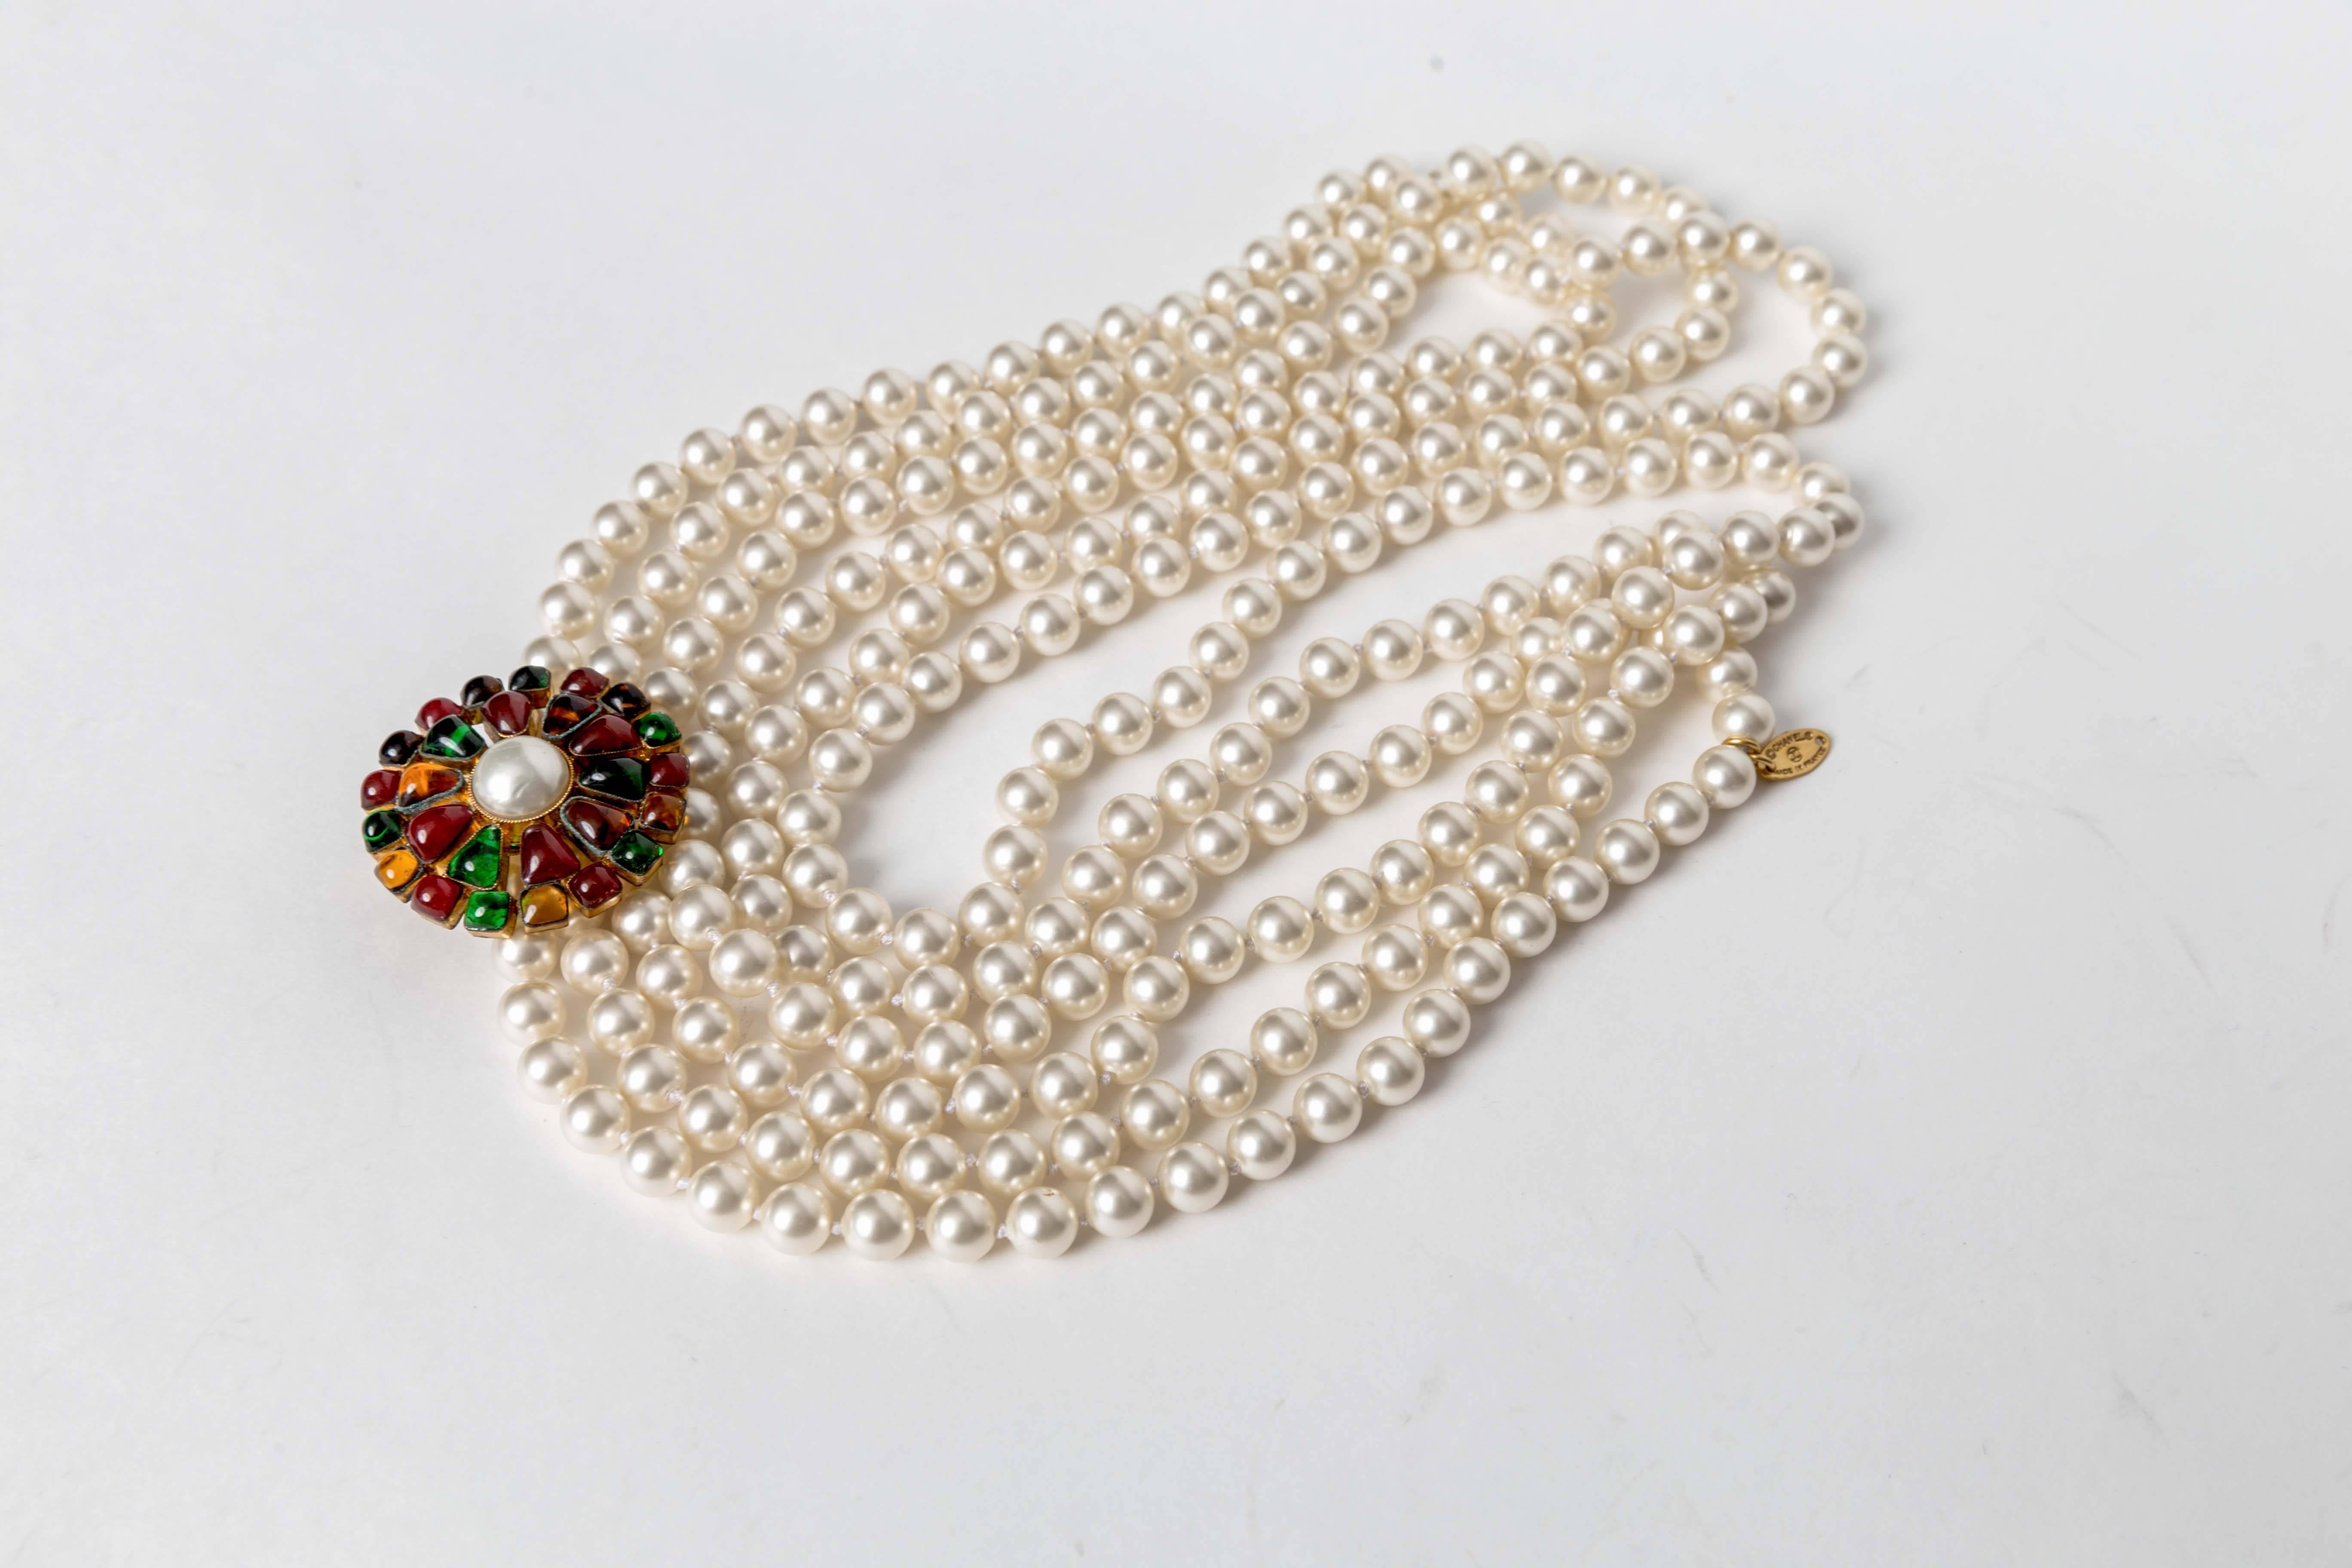 Chanel Multi-strand Pearl & Pâte de Verre Brooch Necklace features three graduated Chanel faux pearl strands, purple and a red,green,and amber pate de verre brooch encircling a larger pearl. 
Stamped 